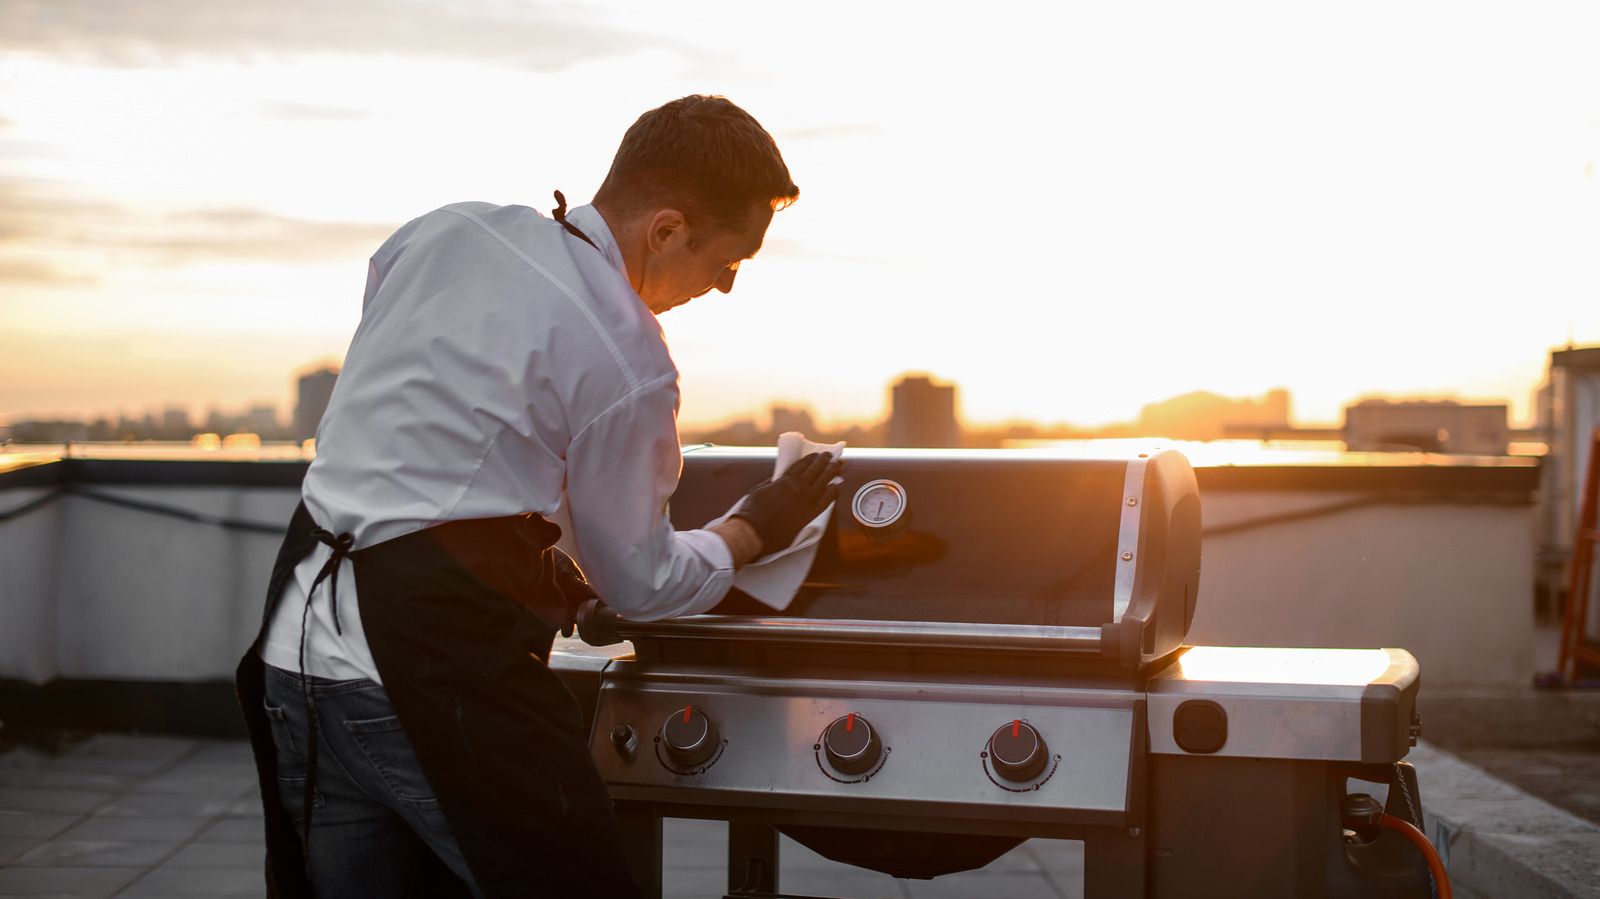 https://www.thedailymeal.com/img/gallery/11-tips-for-keeping-your-grill-shiny-and-clean/l-intro-1691593282.jpg